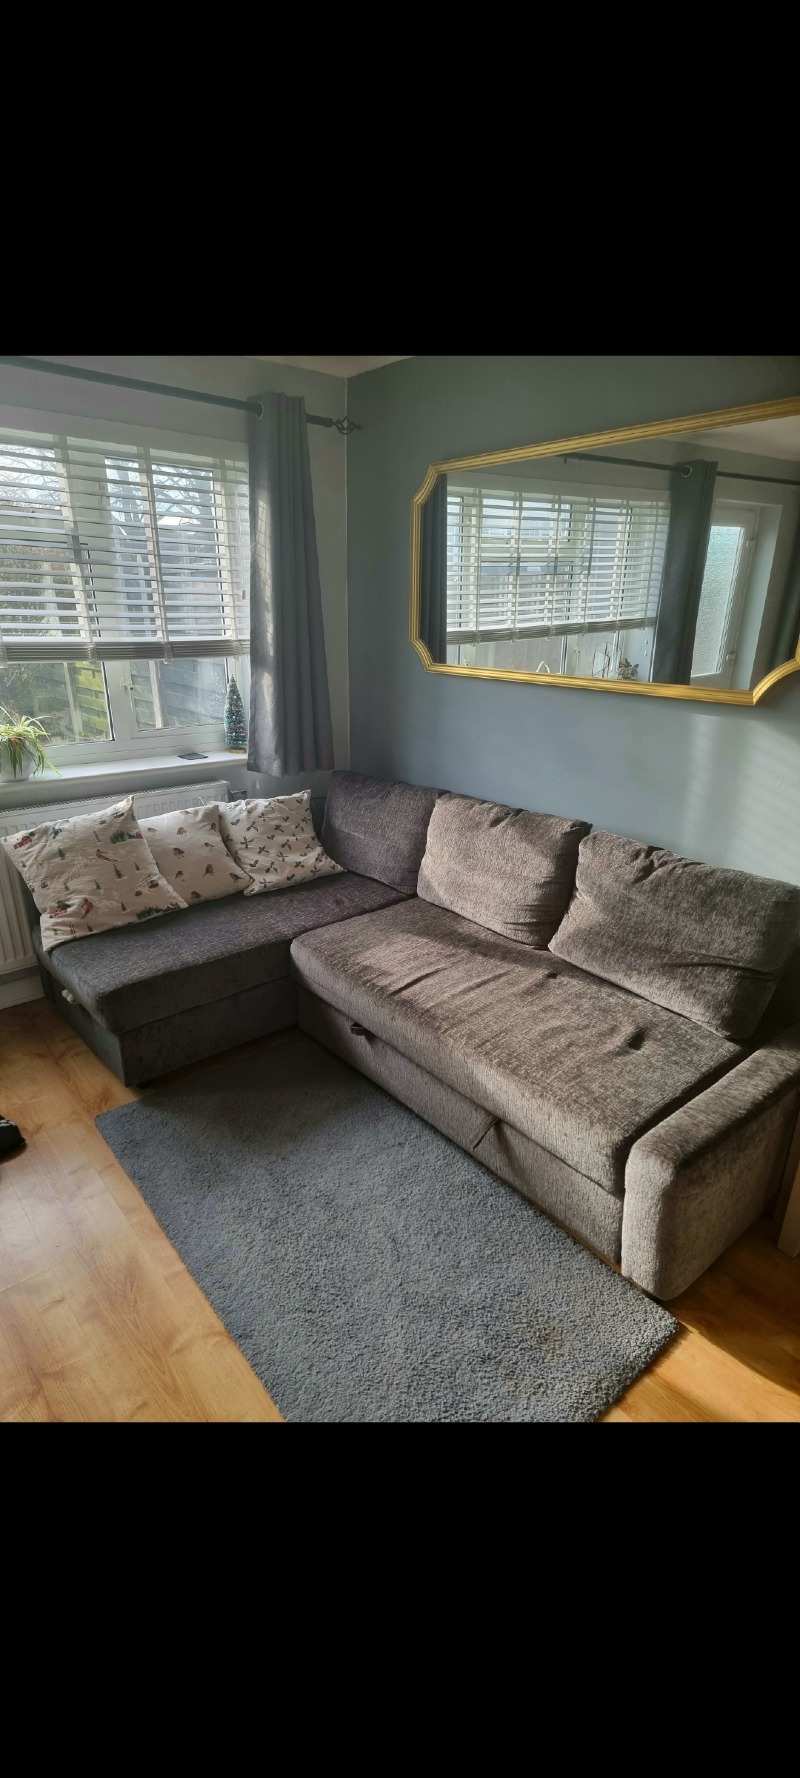 Sofa bed No cash offers. Ikea sofa bed, still in great condition, not a single mark on it and still comfy. Just got a new sofa and want this to go to a good home that needs it. Pickup ASAP TW16 - removed for £0